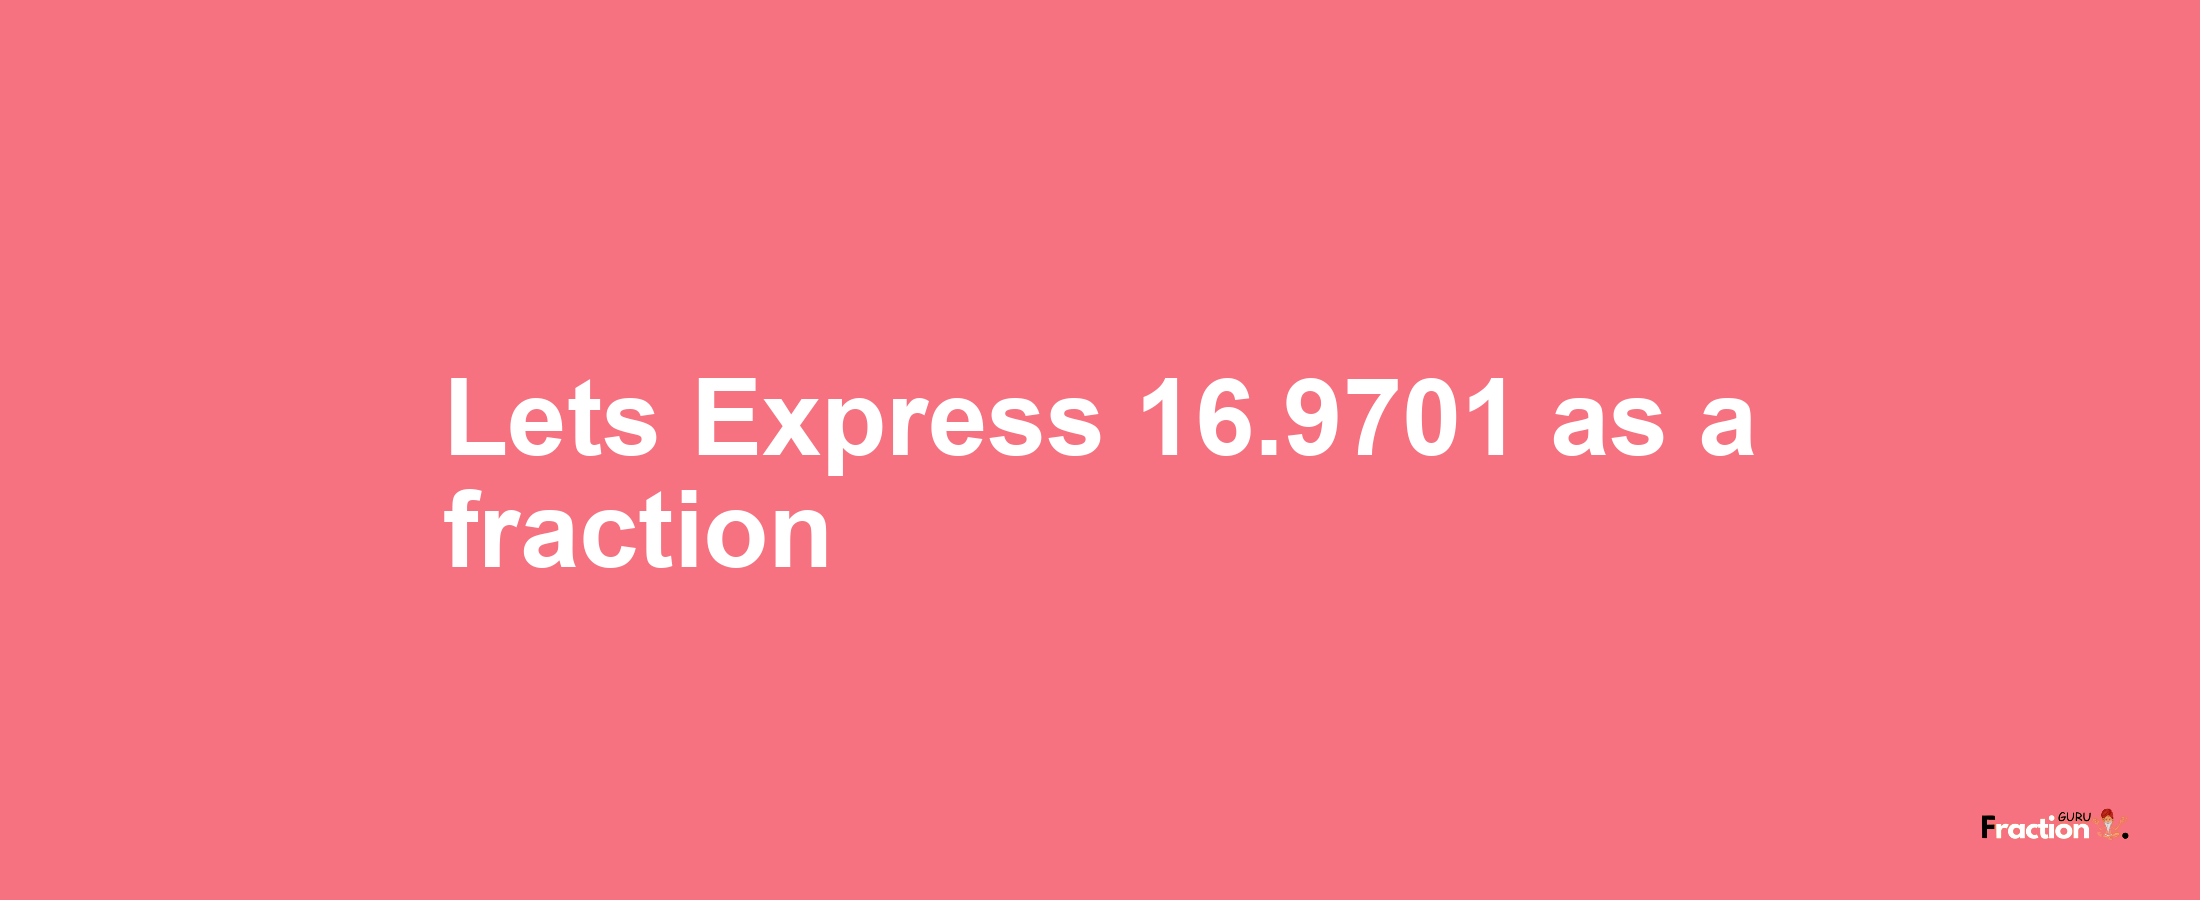 Lets Express 16.9701 as afraction